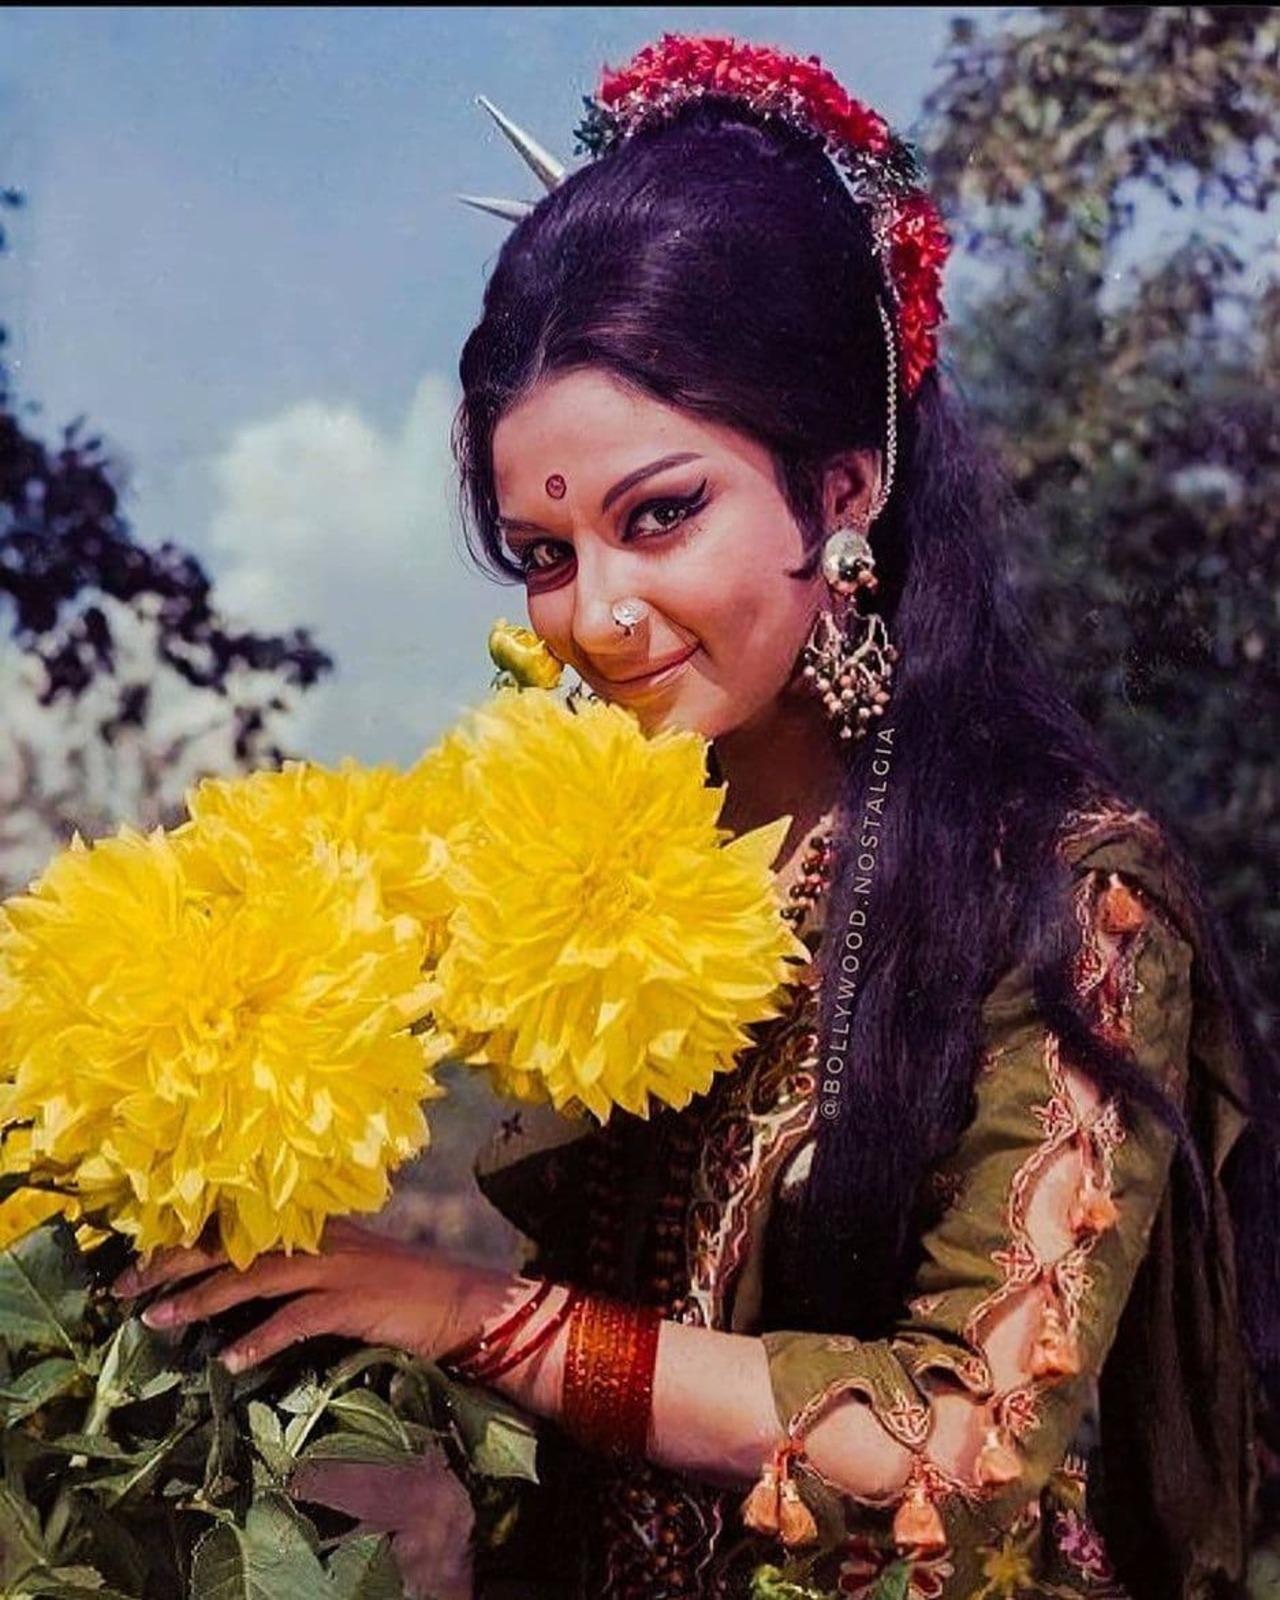 Sharmila Tagore's bouffant
In the '60s and '70s, bold hair and dramatic makeup were the hallmark styles for leaving an indelible mark on the audience. Sharmila Tagore embraced this trend and made a mark of her own with her iconic bouffant, where hair is voluminously piled atop the head in a rounded silhouette, complemented by cascading side tresses. This was perfectly paired with striking winged eyeliner for that extra flair